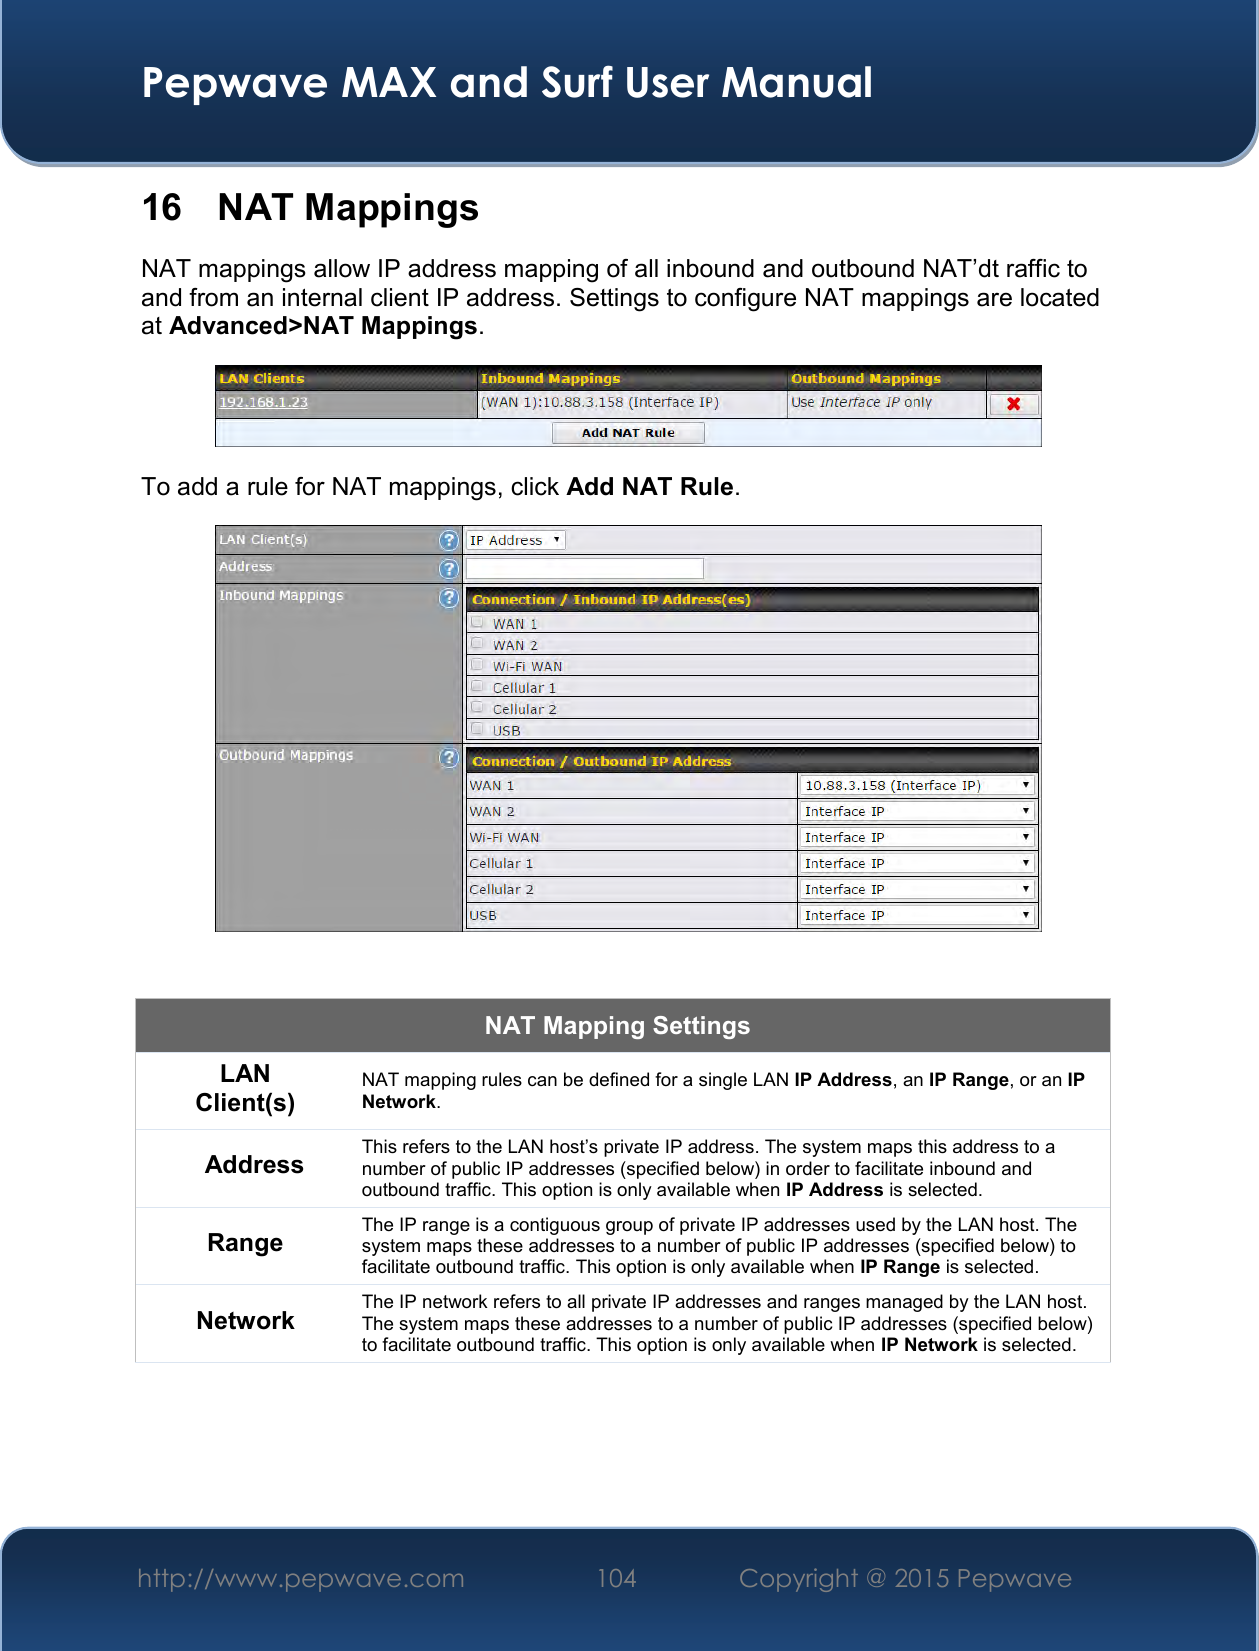  Pepwave MAX and Surf User Manual http://www.pepwave.com 104   Copyright @ 2015 Pepwave   16  NAT Mappings NAT mappings allow IP address mapping of all inbound and outbound NAT’dt raffic to and from an internal client IP address. Settings to configure NAT mappings are located at Advanced&gt;NAT Mappings.  To add a rule for NAT mappings, click Add NAT Rule.   NAT Mapping Settings LAN Client(s) NAT mapping rules can be defined for a single LAN IP Address, an IP Range, or an IP Network. Address This refers to the LAN host’s private IP address. The system maps this address to a number of public IP addresses (specified below) in order to facilitate inbound and outbound traffic. This option is only available when IP Address is selected. Range The IP range is a contiguous group of private IP addresses used by the LAN host. The system maps these addresses to a number of public IP addresses (specified below) to facilitate outbound traffic. This option is only available when IP Range is selected. Network The IP network refers to all private IP addresses and ranges managed by the LAN host. The system maps these addresses to a number of public IP addresses (specified below) to facilitate outbound traffic. This option is only available when IP Network is selected. 